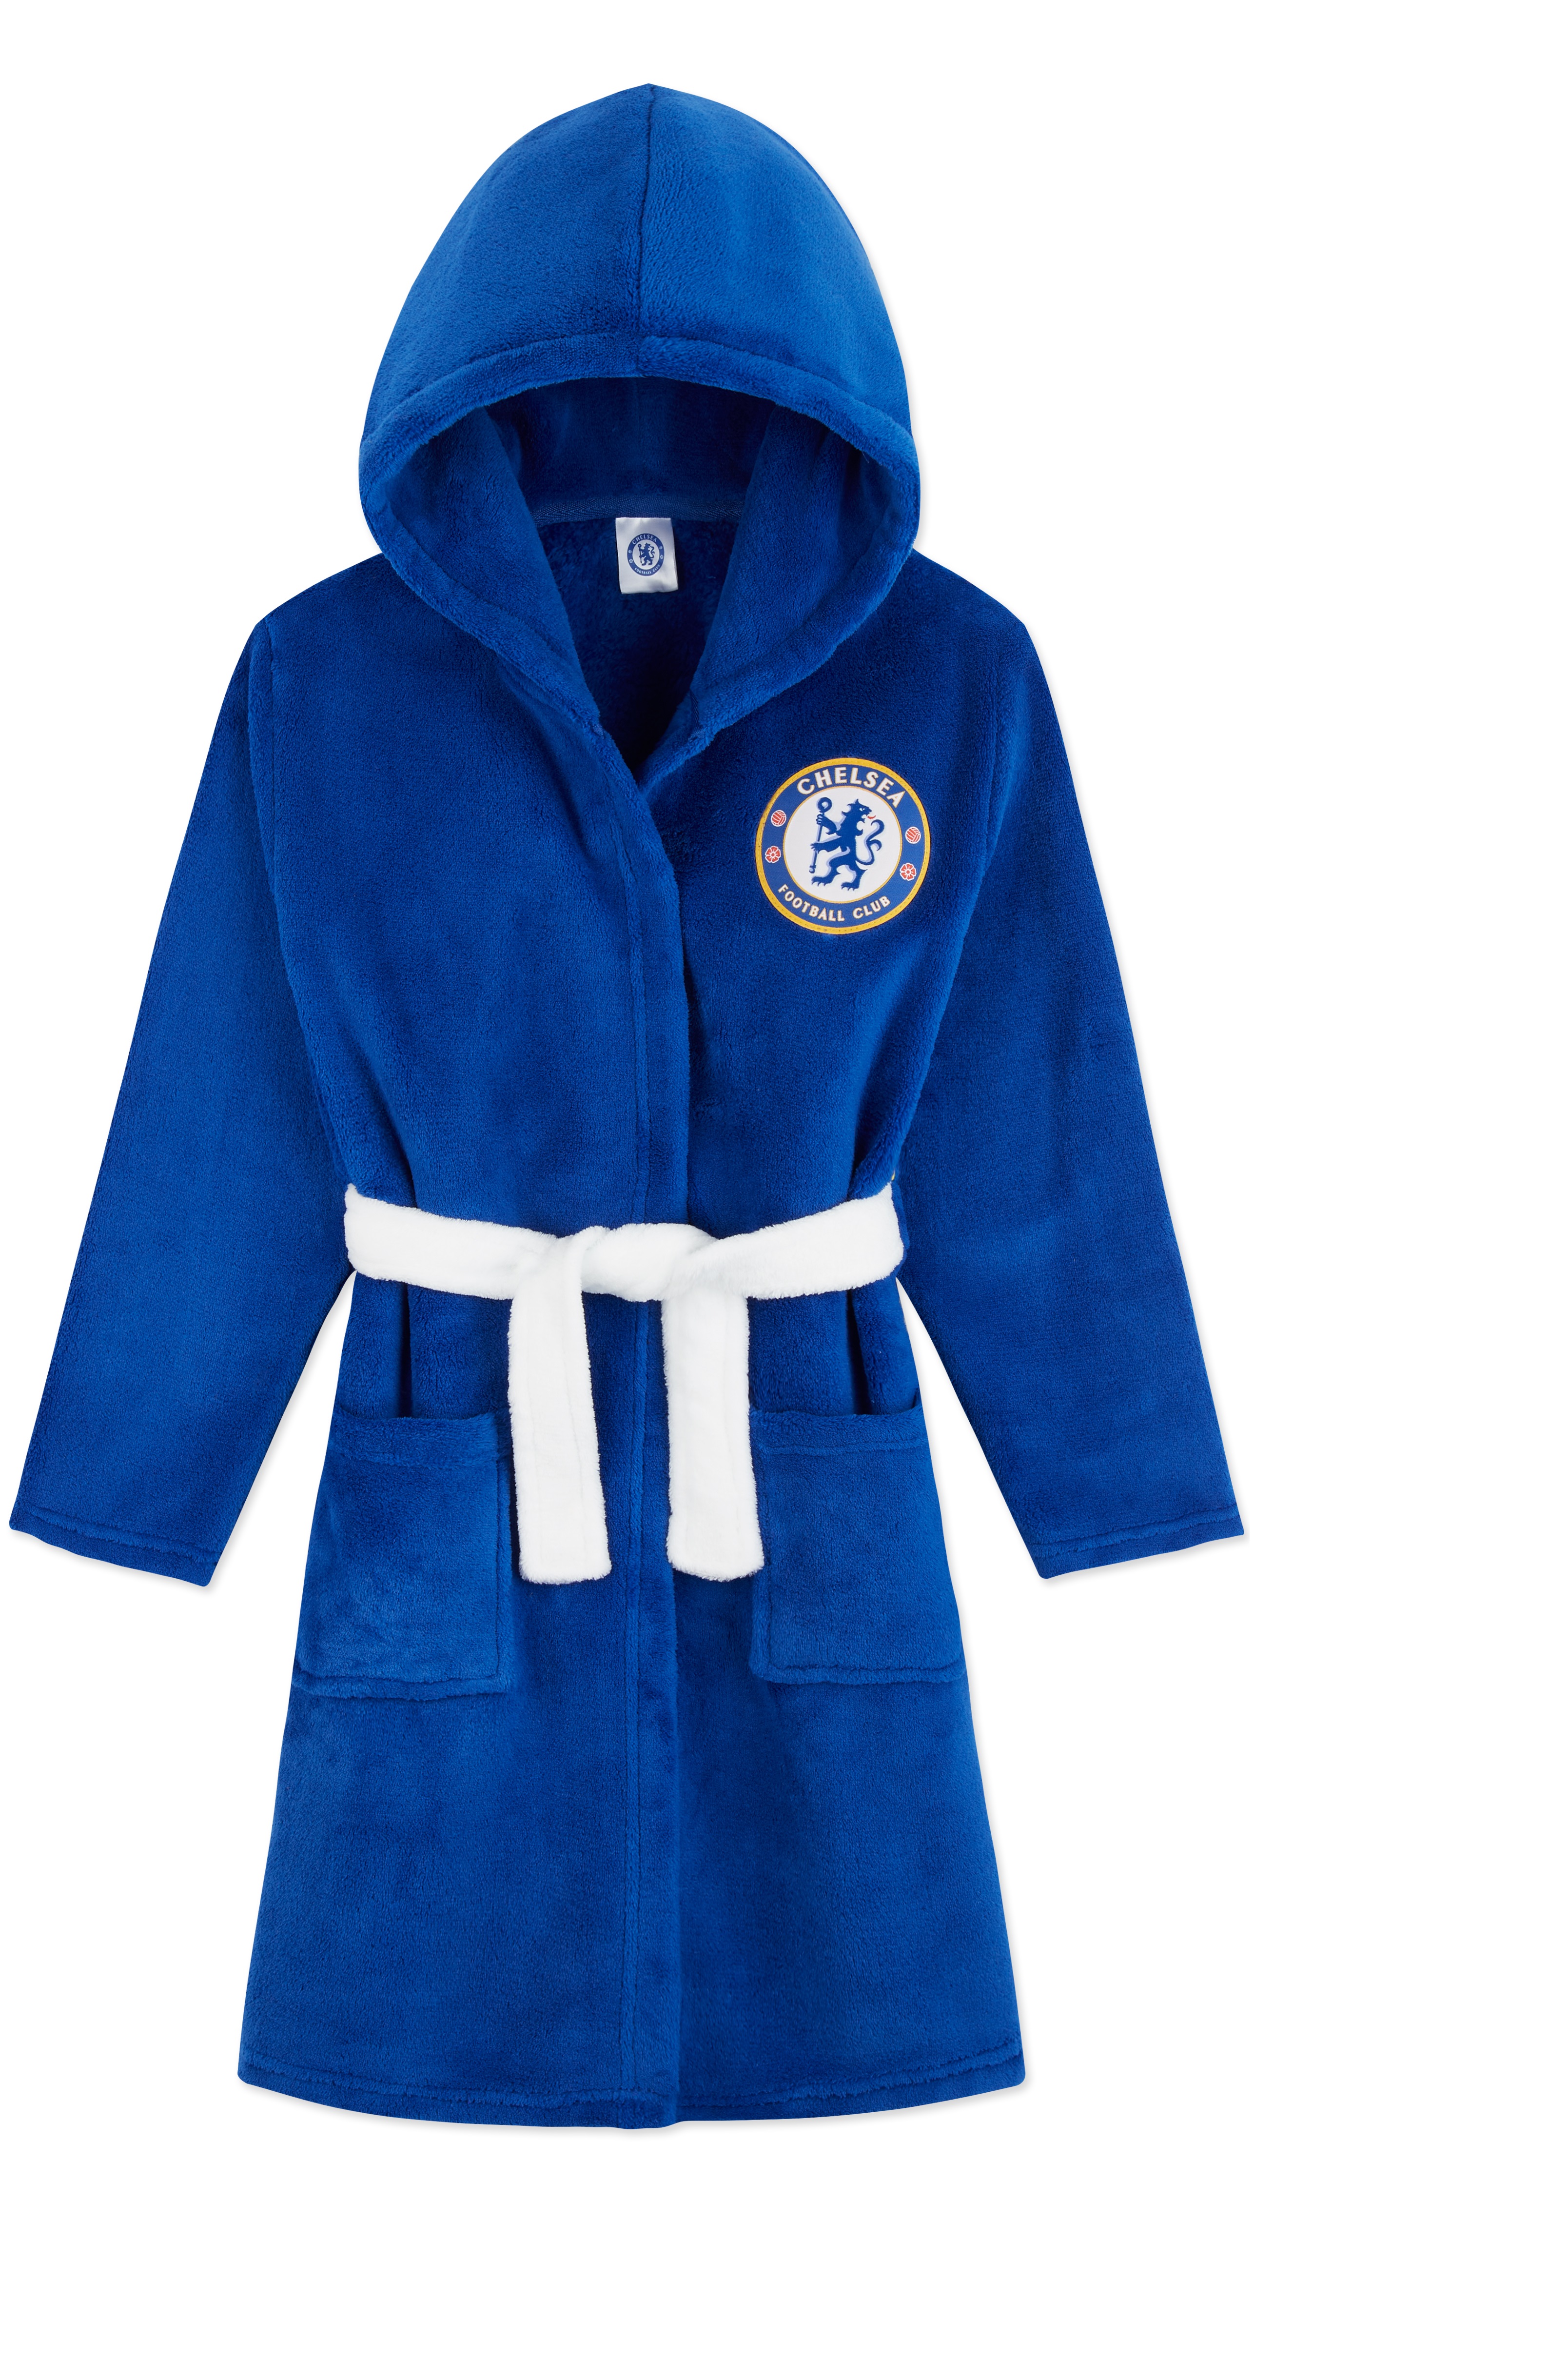 Toddler Boys Knee Length Elbow Sleeve Paw Patrol Robe, Color: Blue -  JCPenney